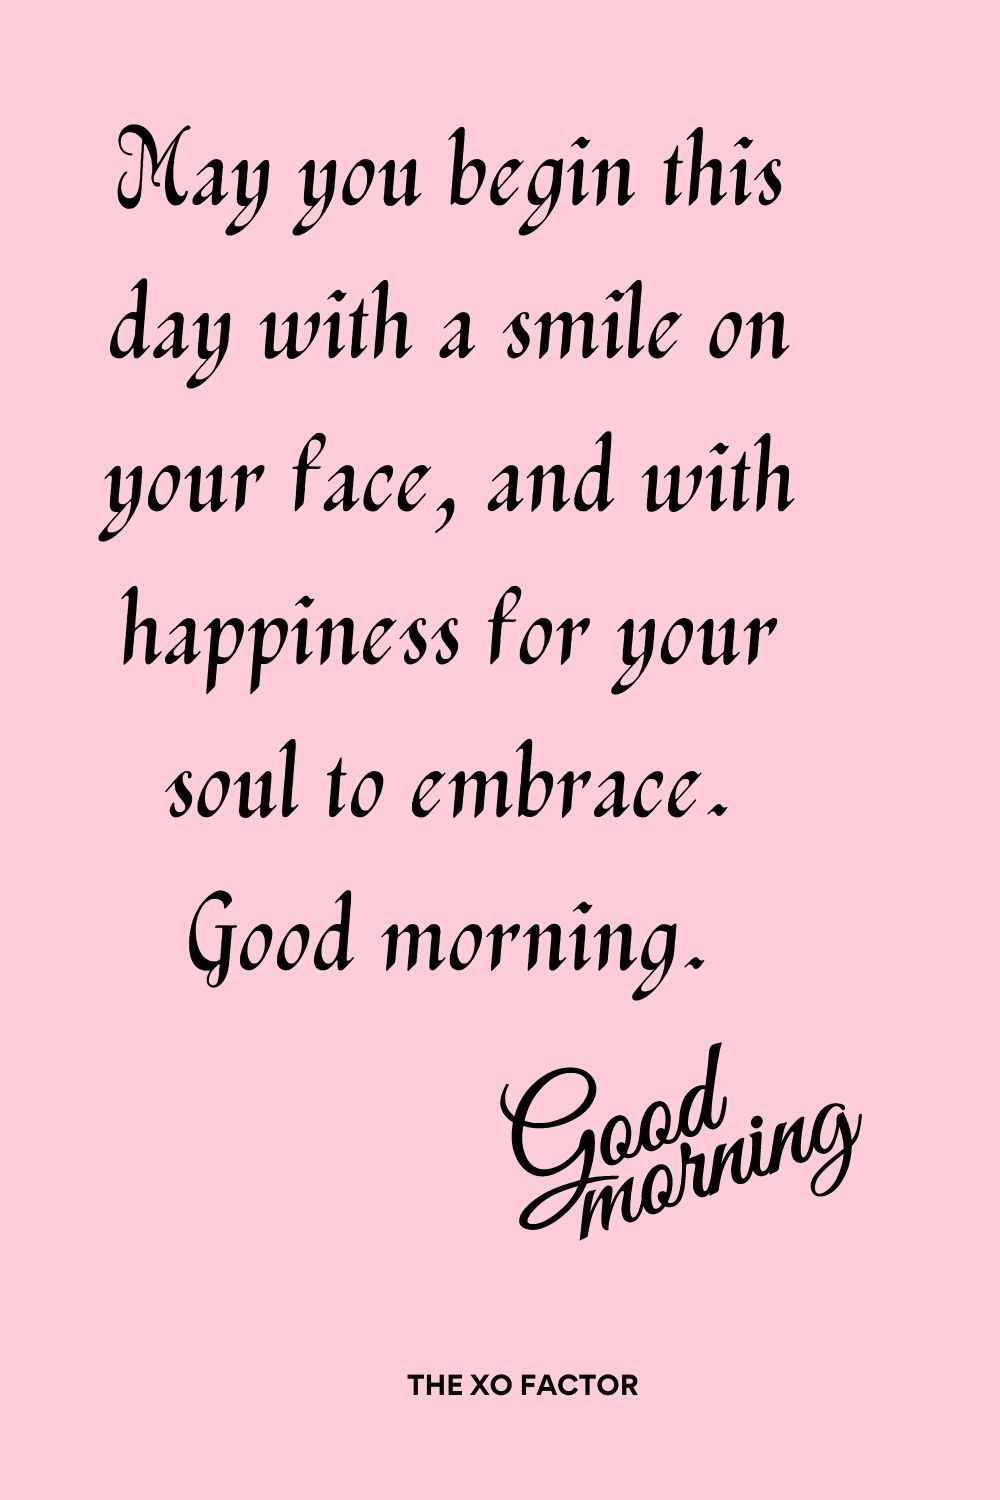 May you begin this day with a smile on your face, and with happiness for your soul to embrace. Good morning.